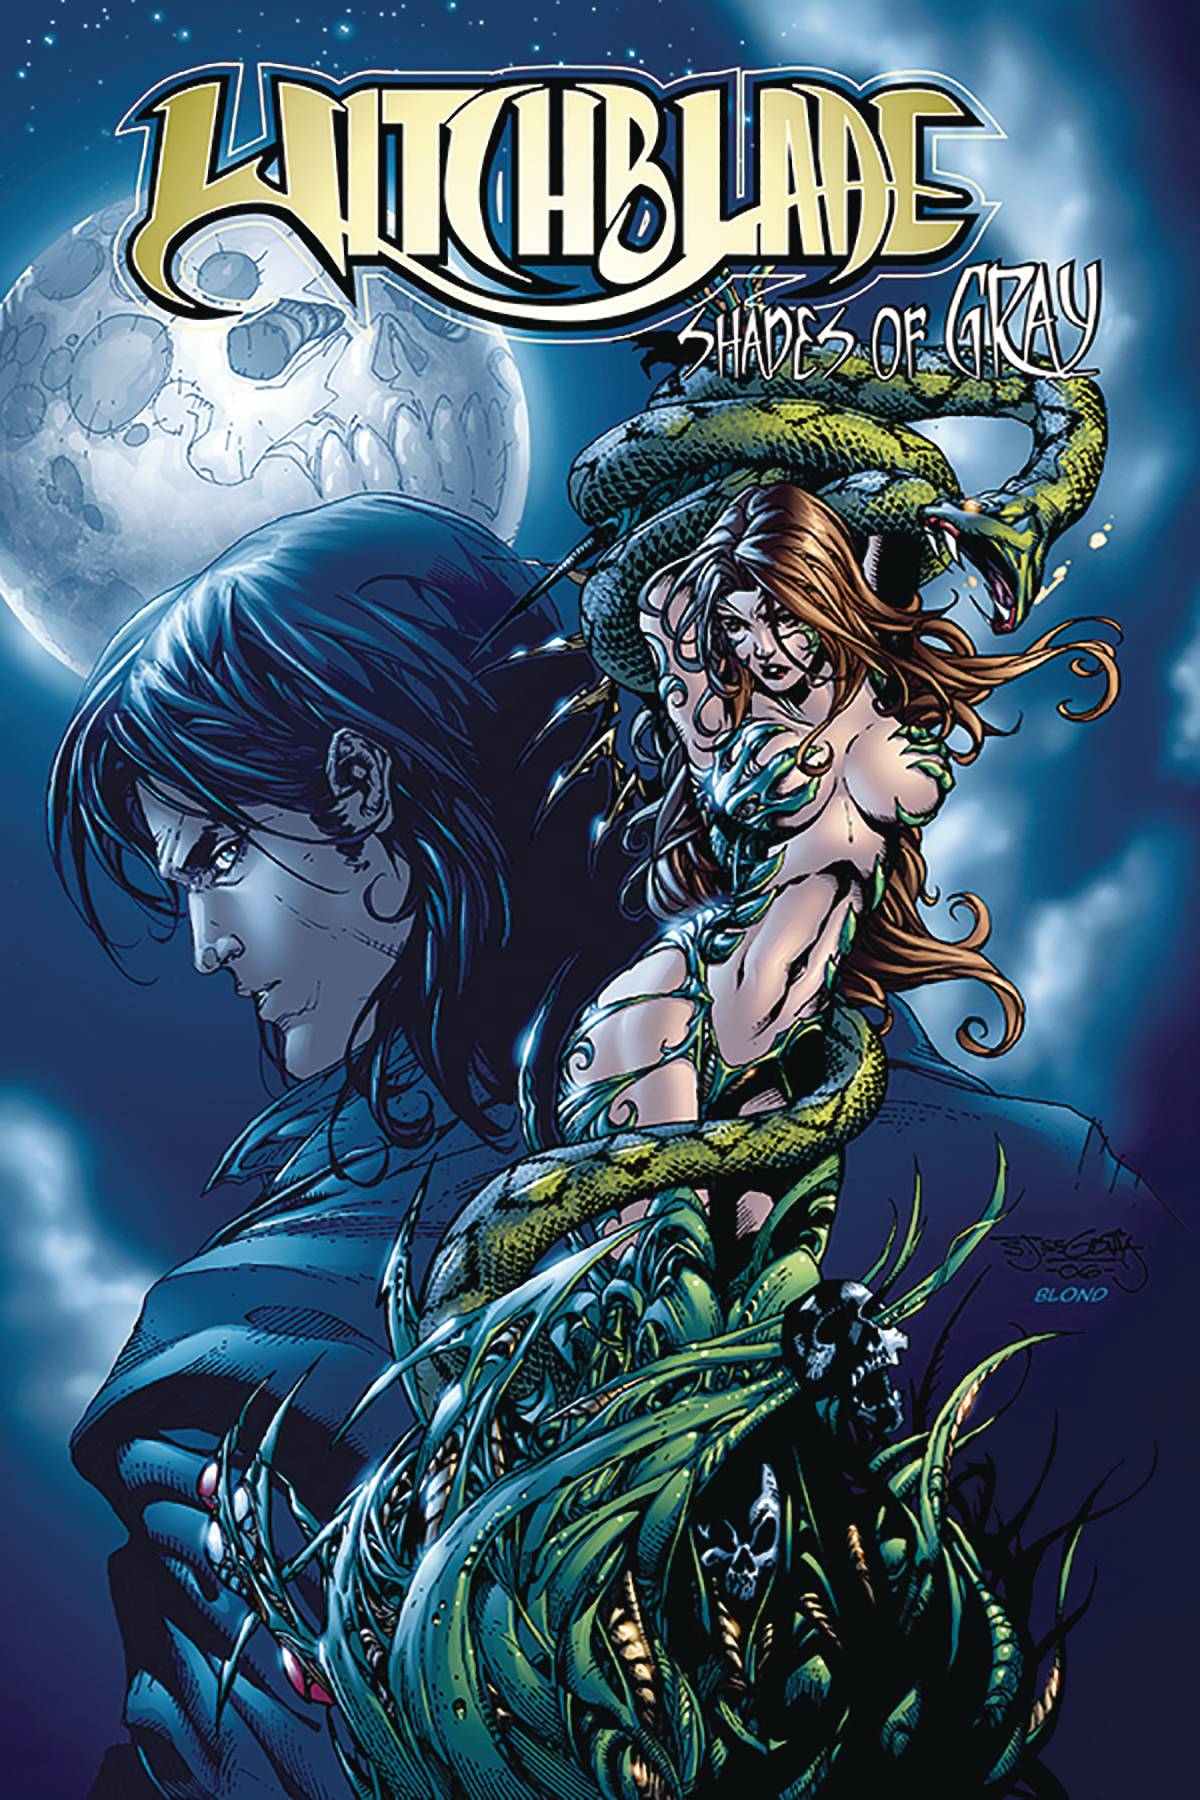 Witchblade Shades of Gray Graphic Novel